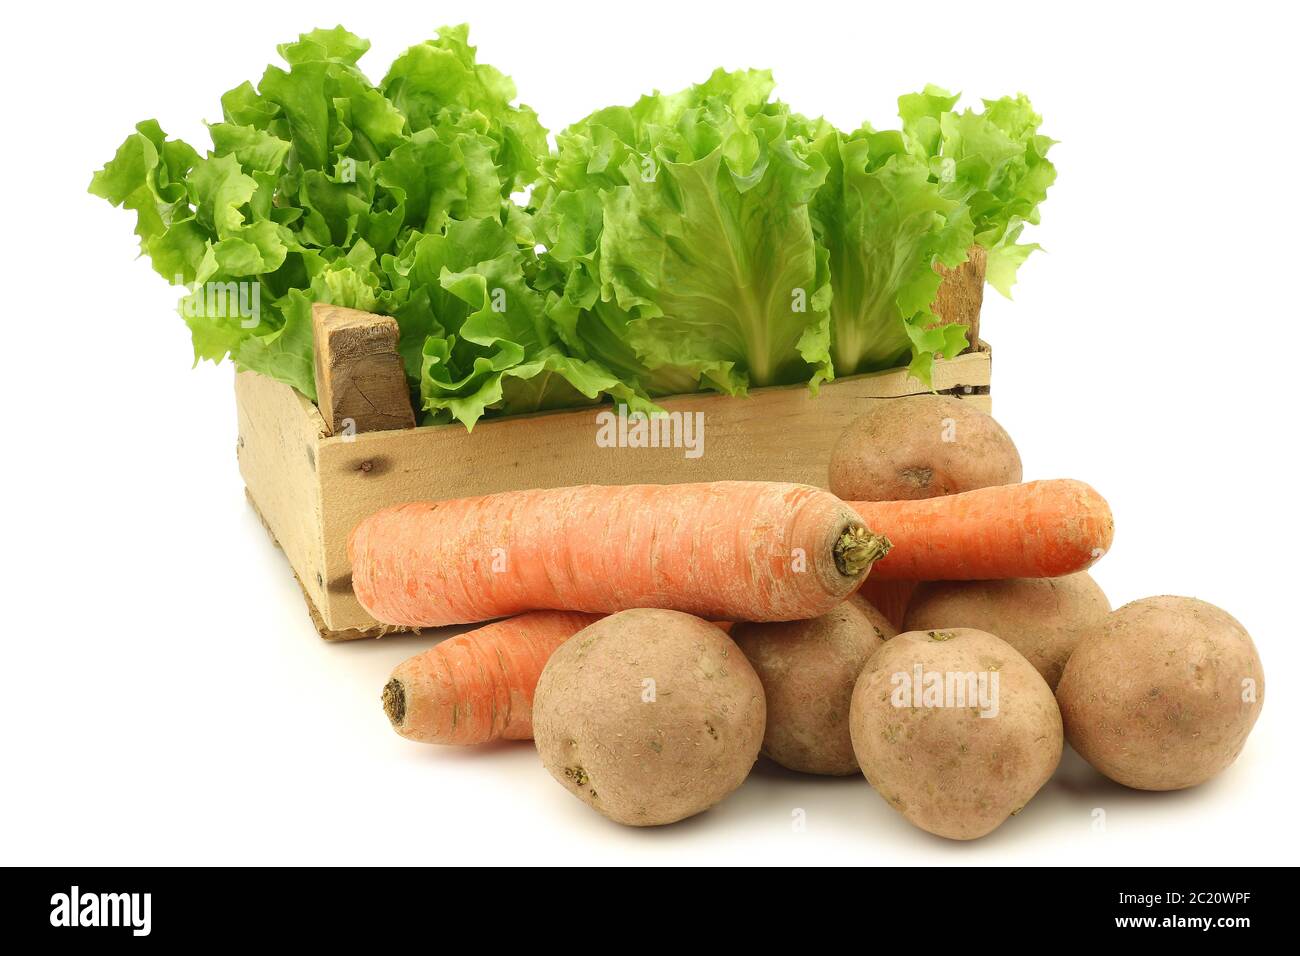 Fresh endive and some winter vegetables in a wooden crate on a white background Stock Photo